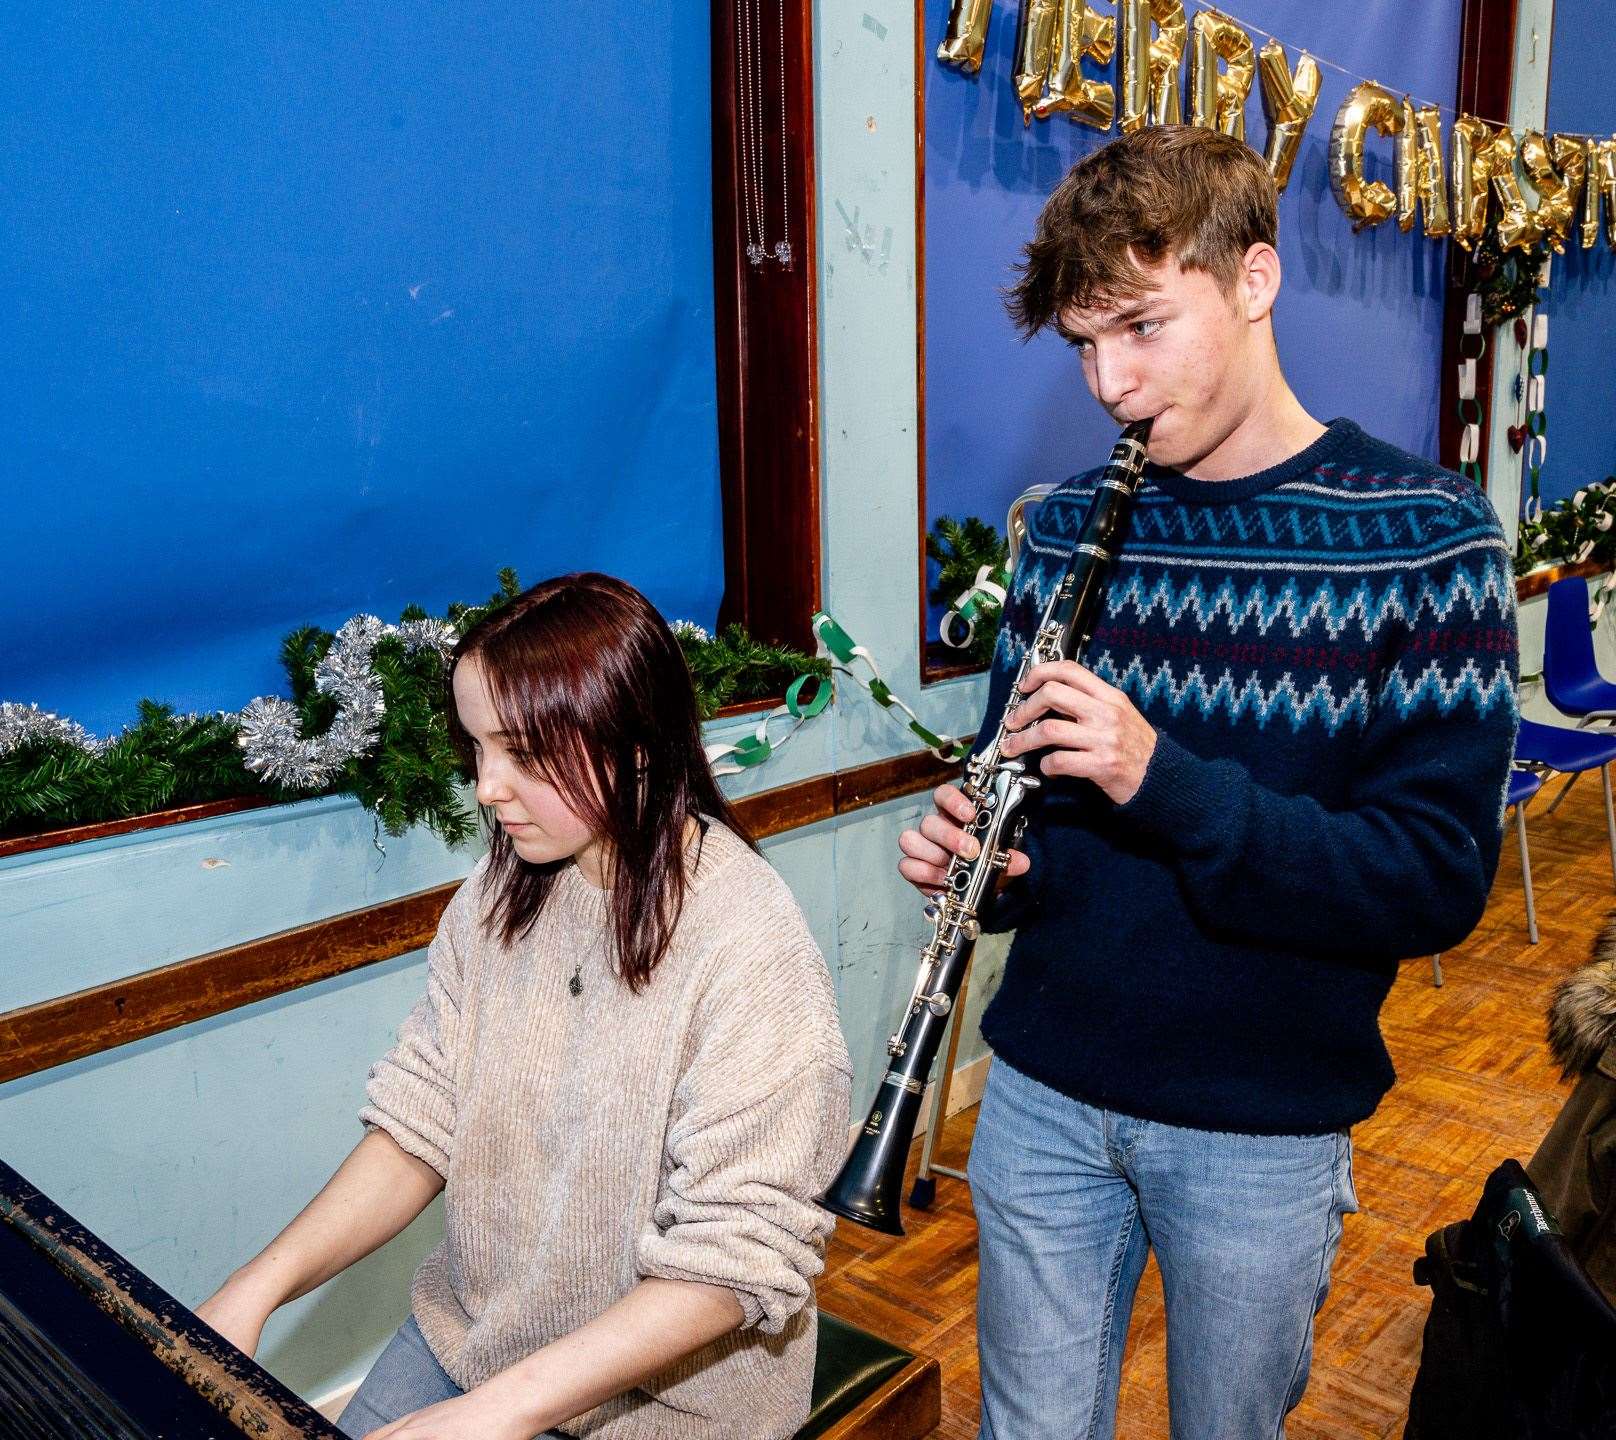 Isla Robertson and Alexander Shepherd were among a number of Dornoch Academy students who provided musical entertainment at the fair in the school. Picture: Andy Kirby